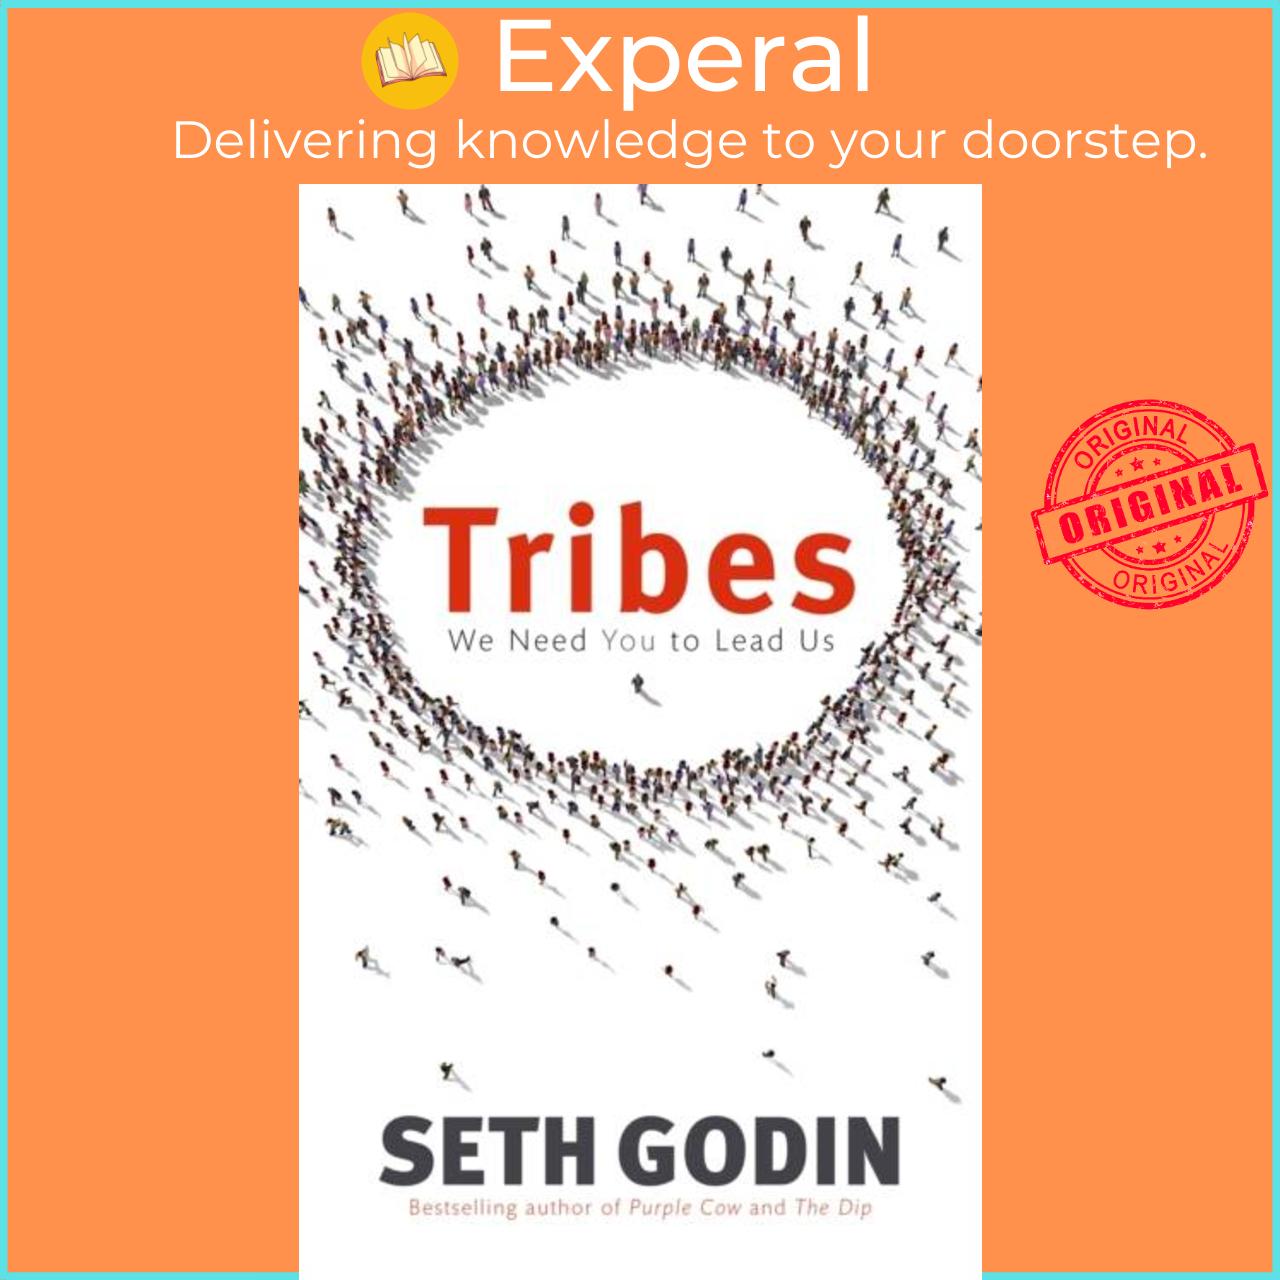 Sách - Tribes - We need you to lead us by Seth Godin (UK edition, paperback)